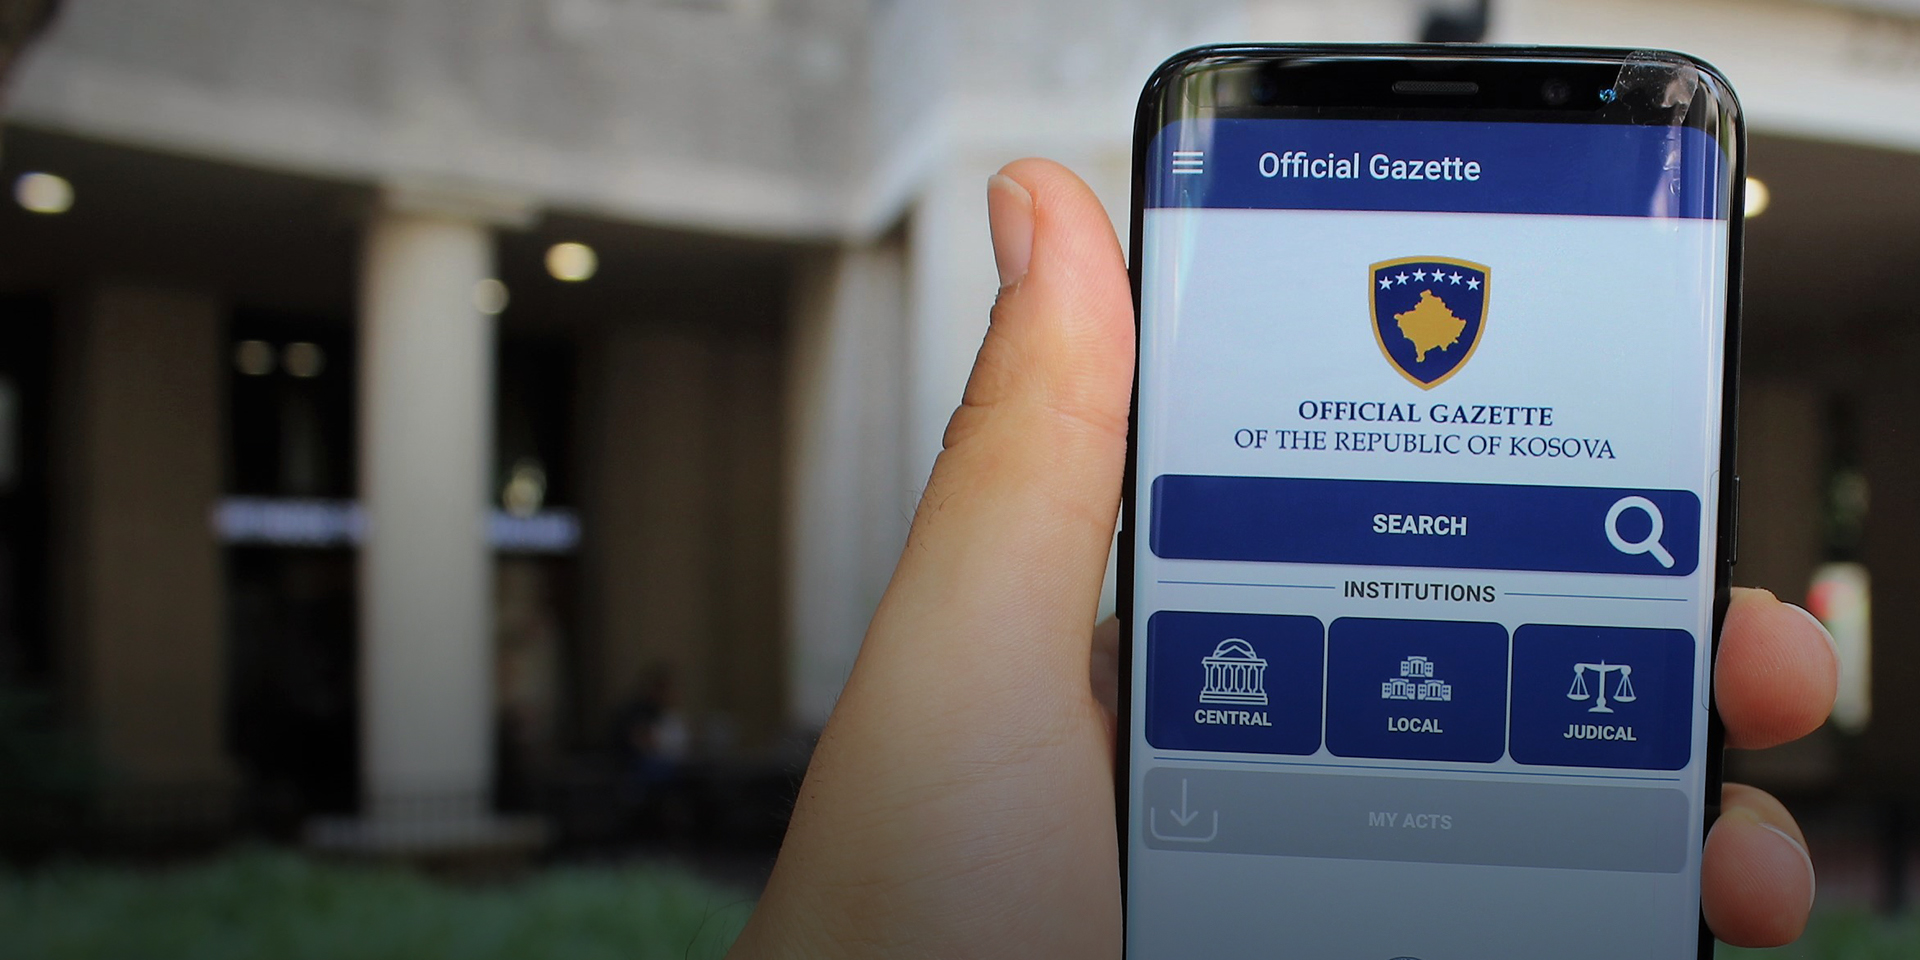 A phone displays the Official Gazette of Kosovo mobile app